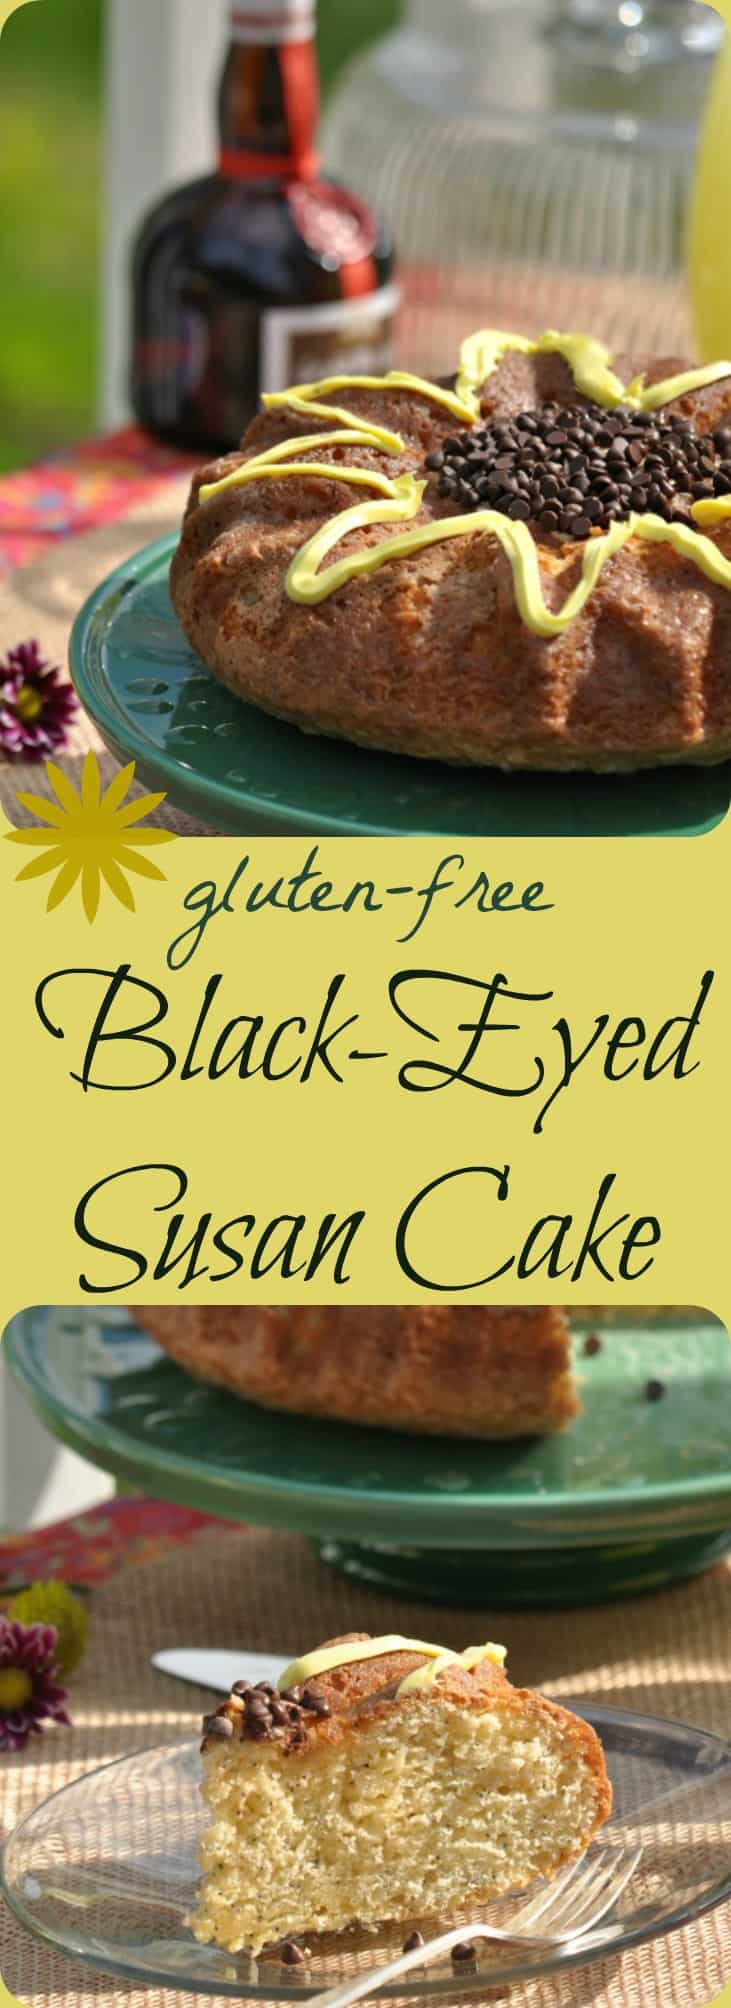 Gluten Free Black-Eyed Susan Cake - deceptively light for a pound cake, with just the right sweetness. Perfect for Preakness Stakes or any day you want to taste like spring! | gfJules